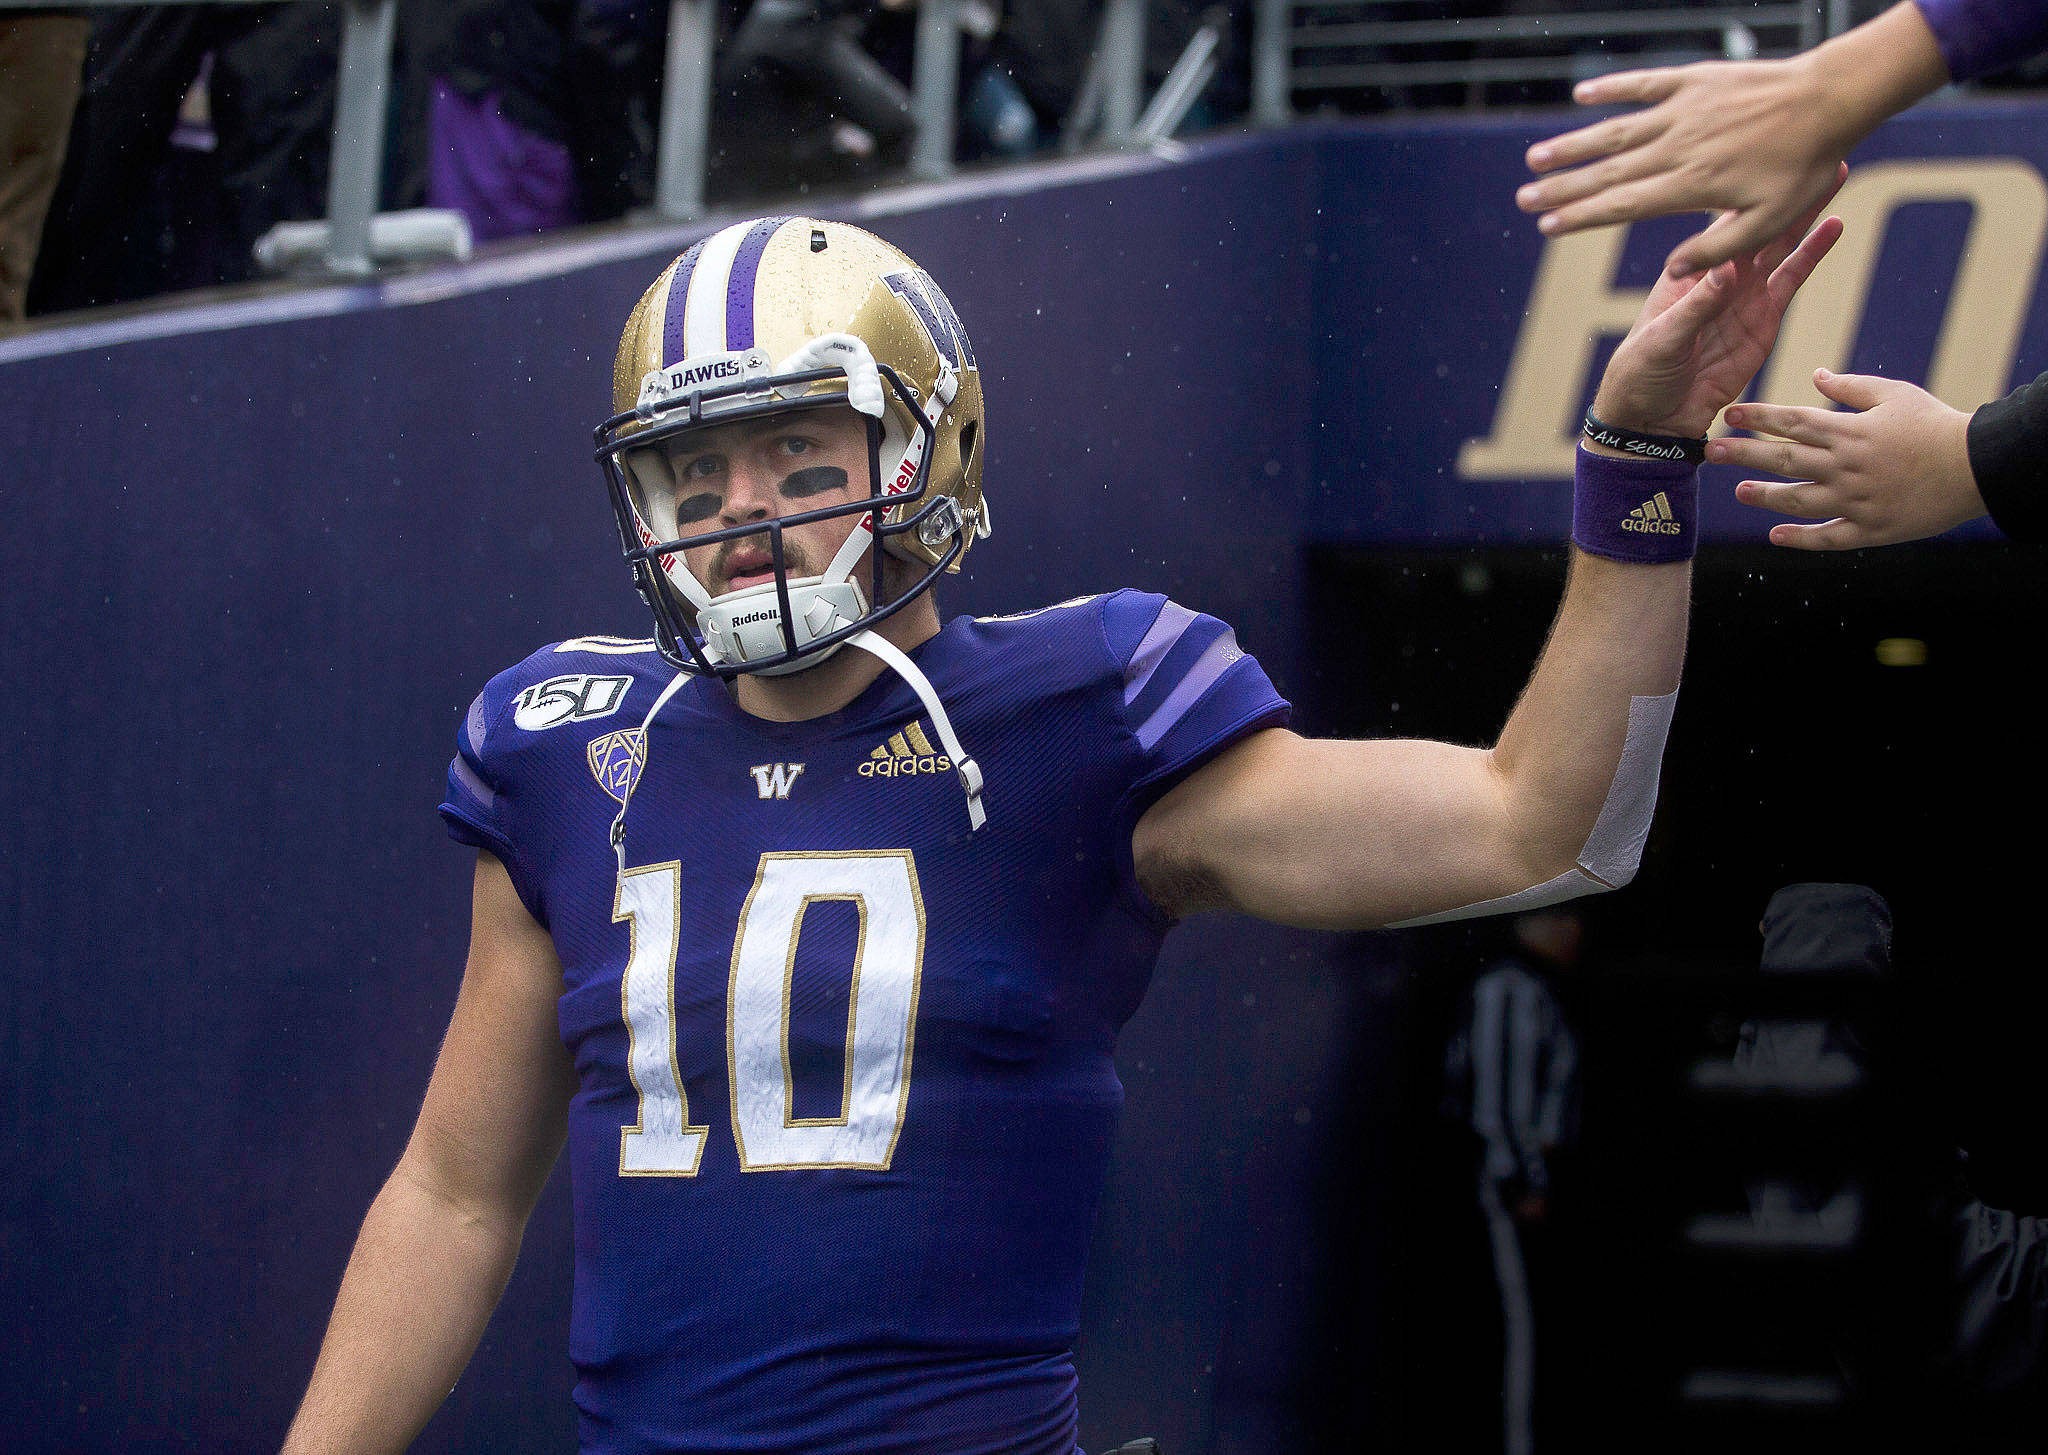 Washington Huskies quarterback Jacob Eason high-fives a fan as he walks onto the field before a game against Oregon on Oct. 19, 2019, in Seattle. (Olivia Vanni / Herald file)